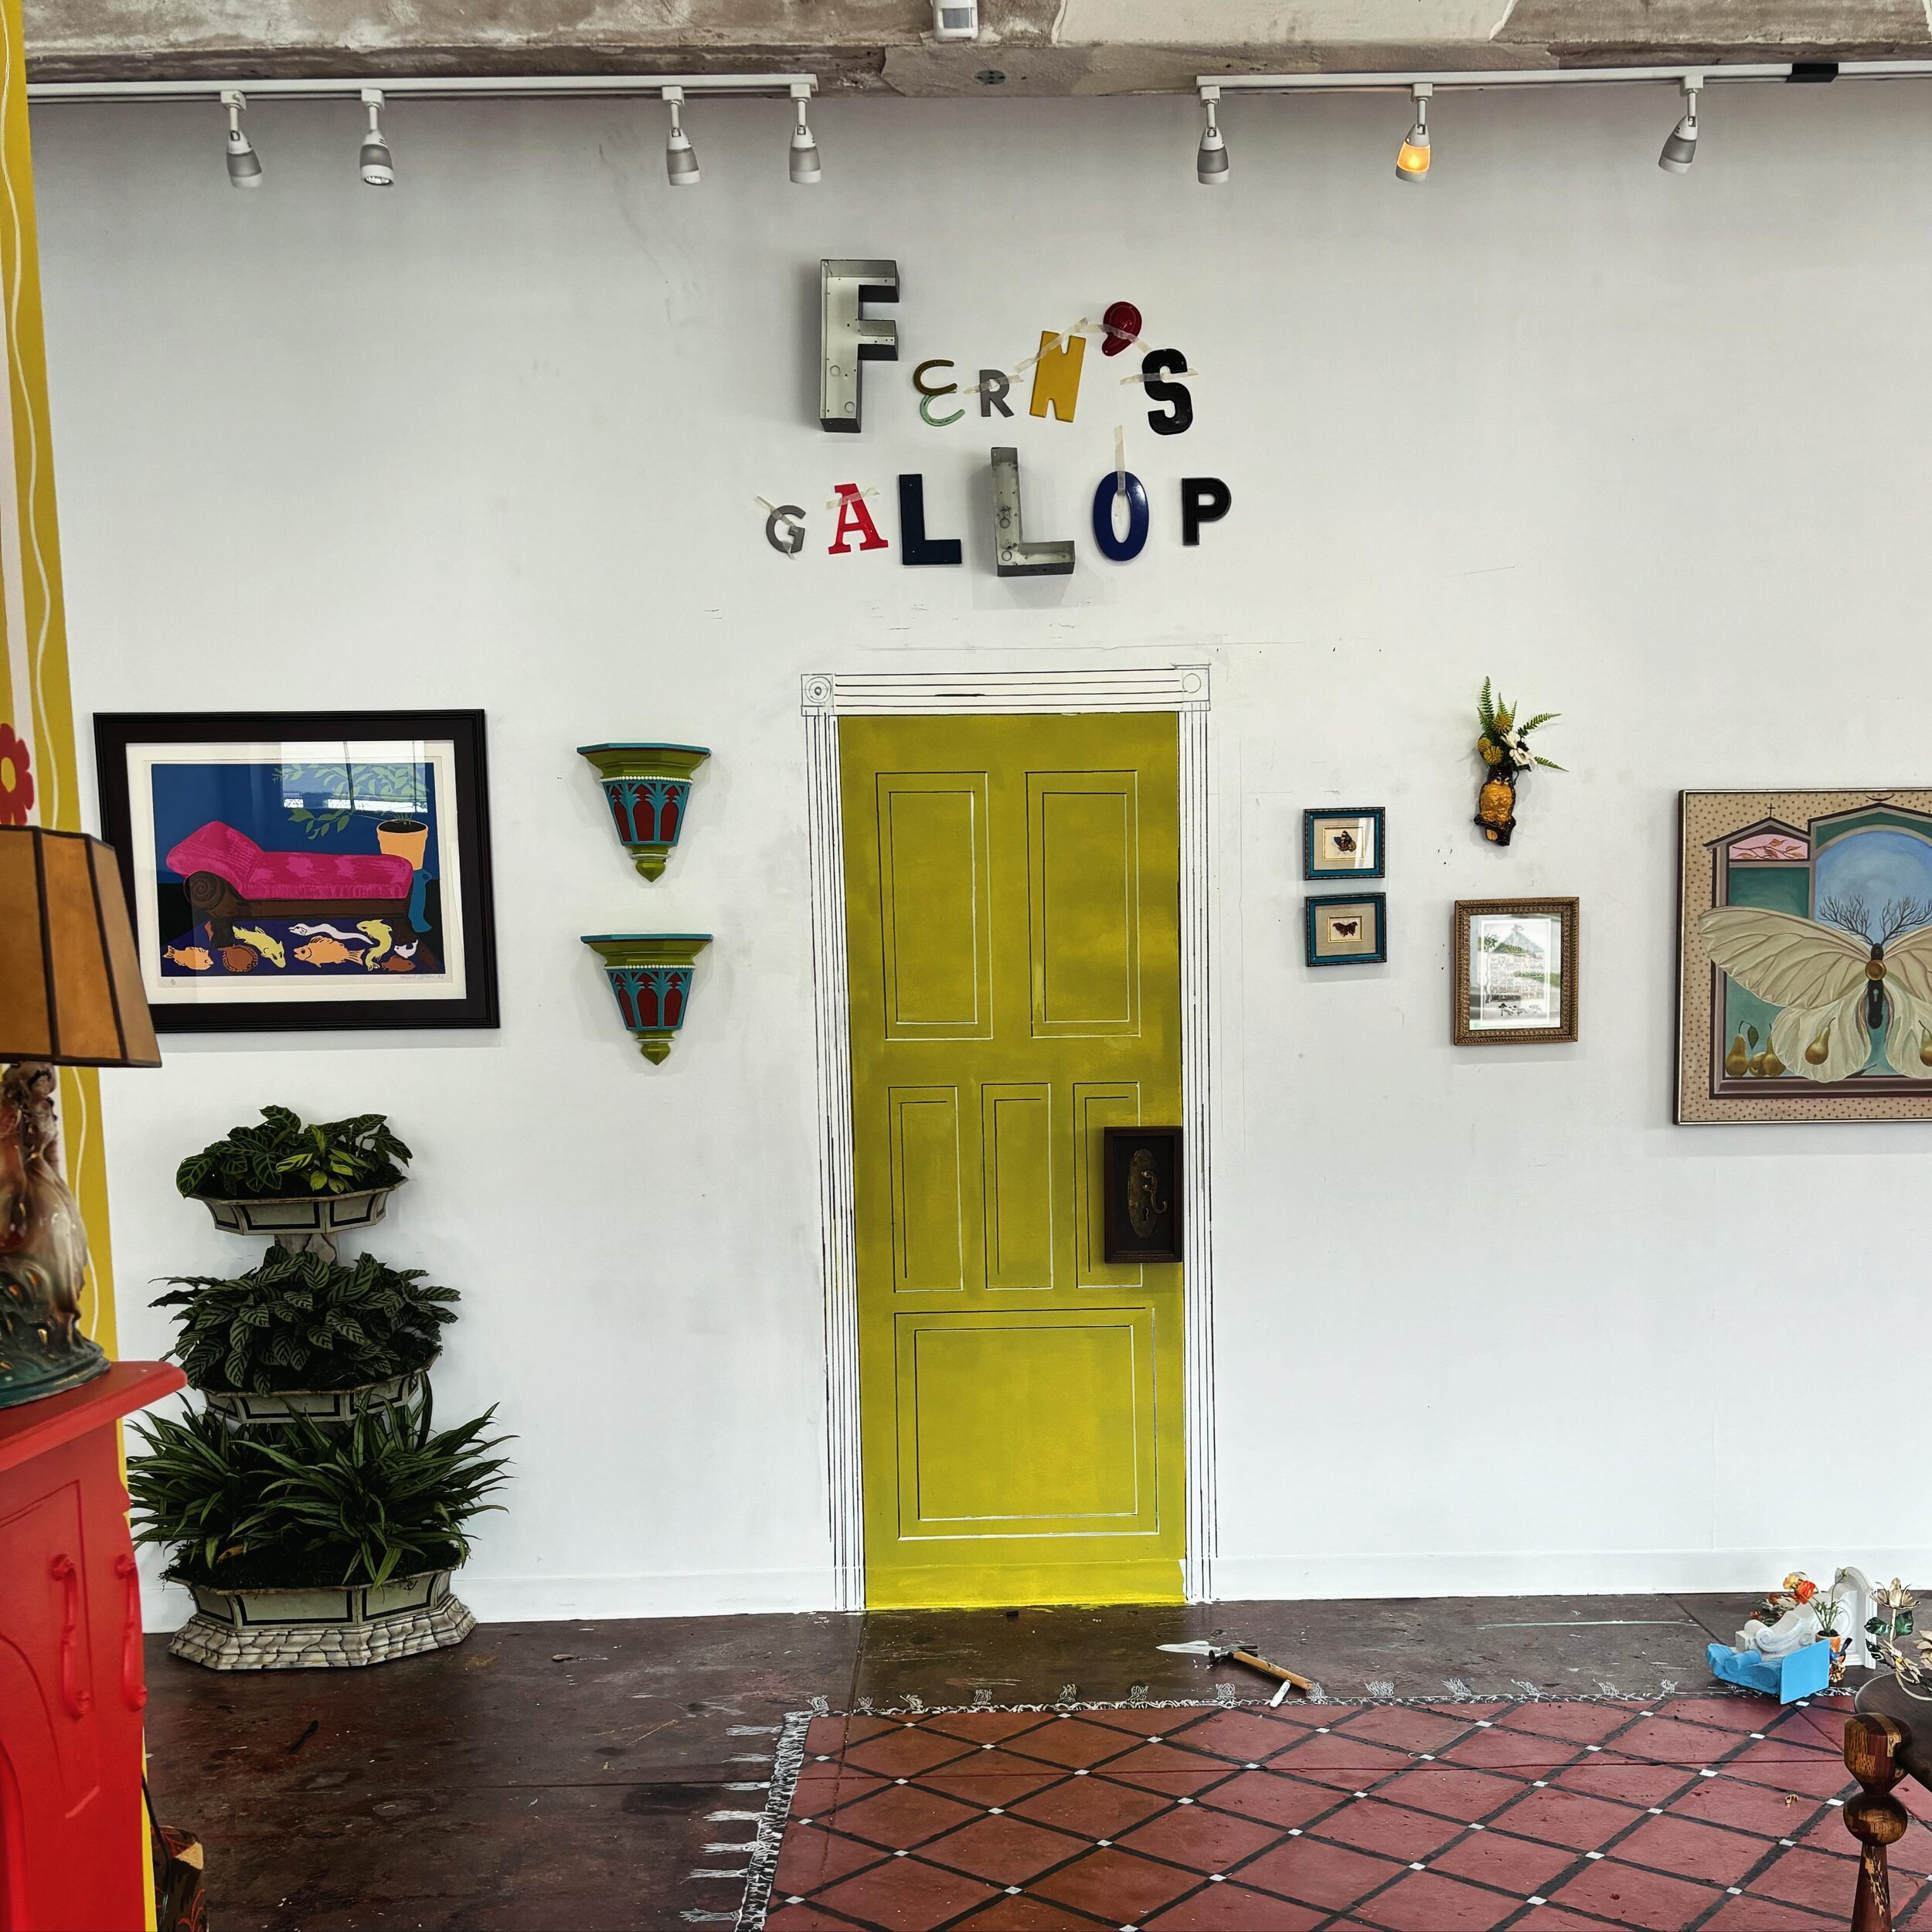 Spring Break is over&hellip;back to Fern&rsquo;s! Open hours are Tuesday through Friday 10am to 4pm. Please pop in for a visit. Have a great week! 

#newgallery #houstonartscene #whimsicalart #houstonheights #homeiswheretheheartis